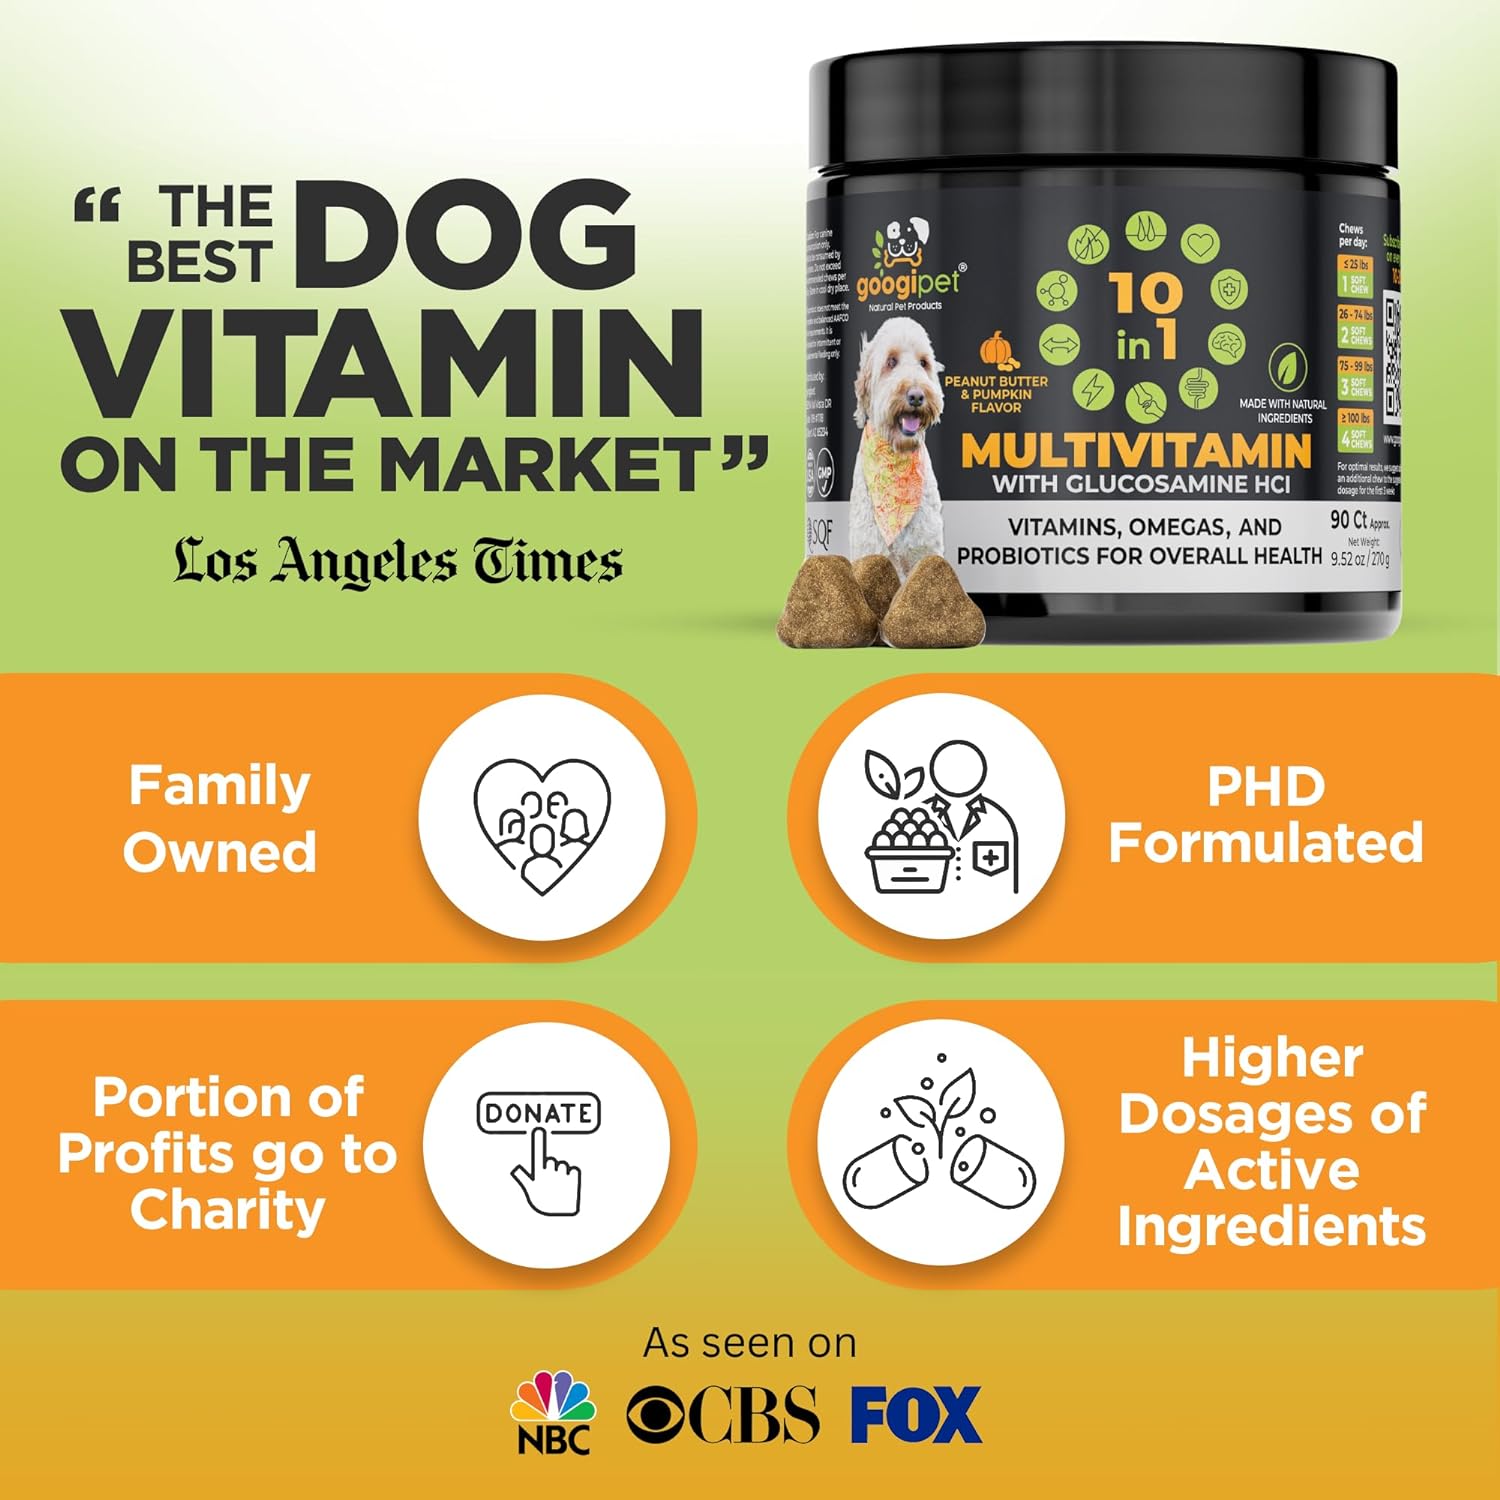 Googipet 10 in 1 Dog Multivitamin Chewable with Dog Probiotics for Gut Health, Dog Vitamins and Supplements w/Vitamin C & Glucosamine for Joint Support - Omega 3s (Peanut Butter & Pumpkin Flavor) : Pet Supplies